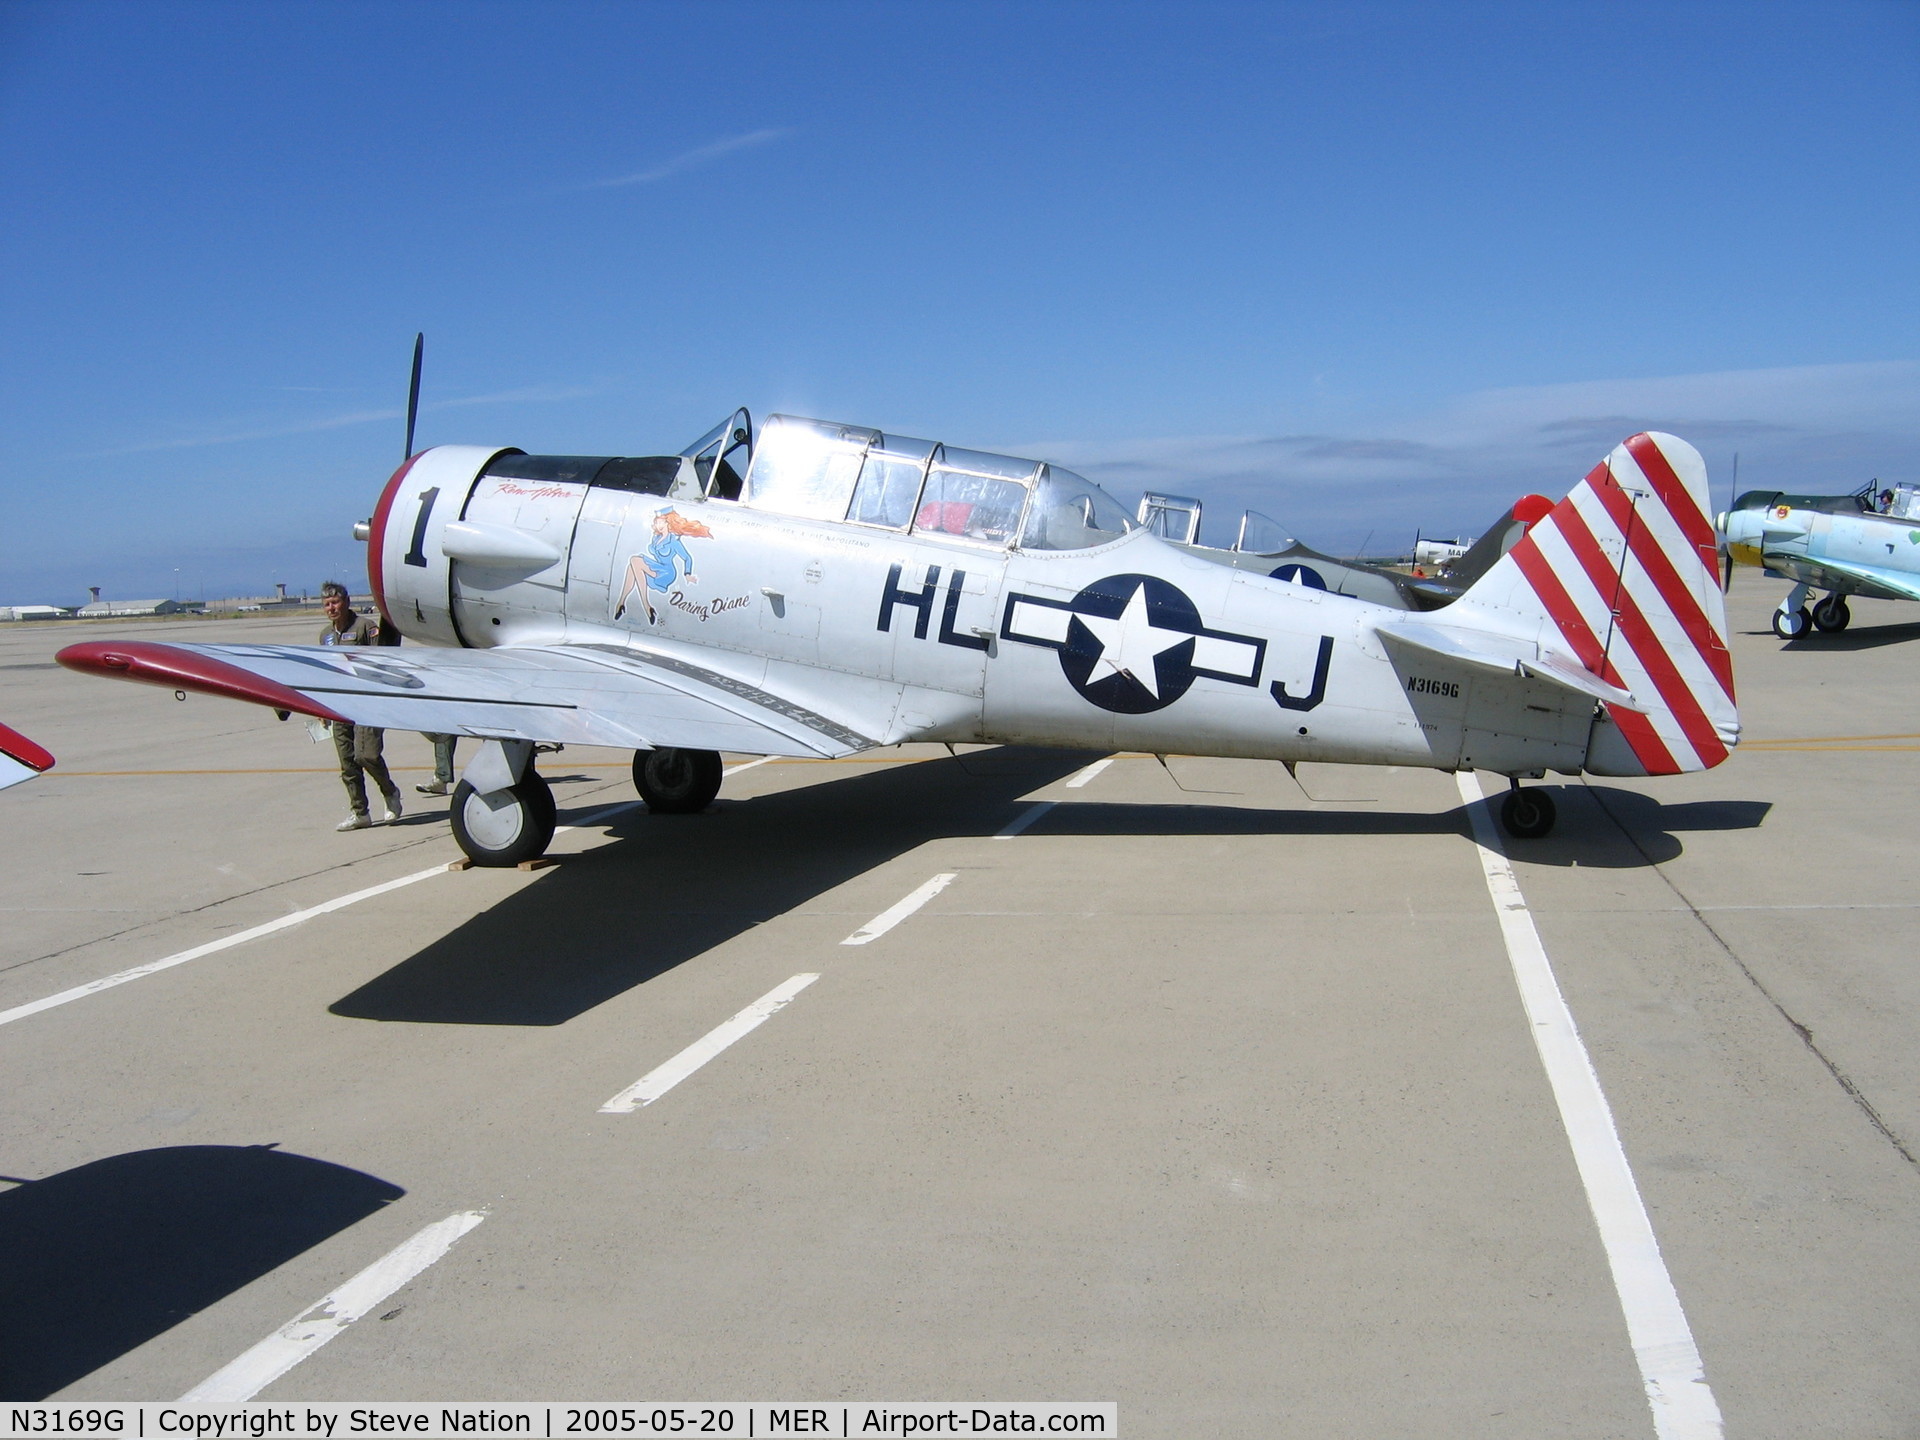 N3169G, 1945 North American AT-6F Texan C/N 121-42937, Carter Clark's AT-6F (ex-BuAer 111974) painted as USAAF Code 